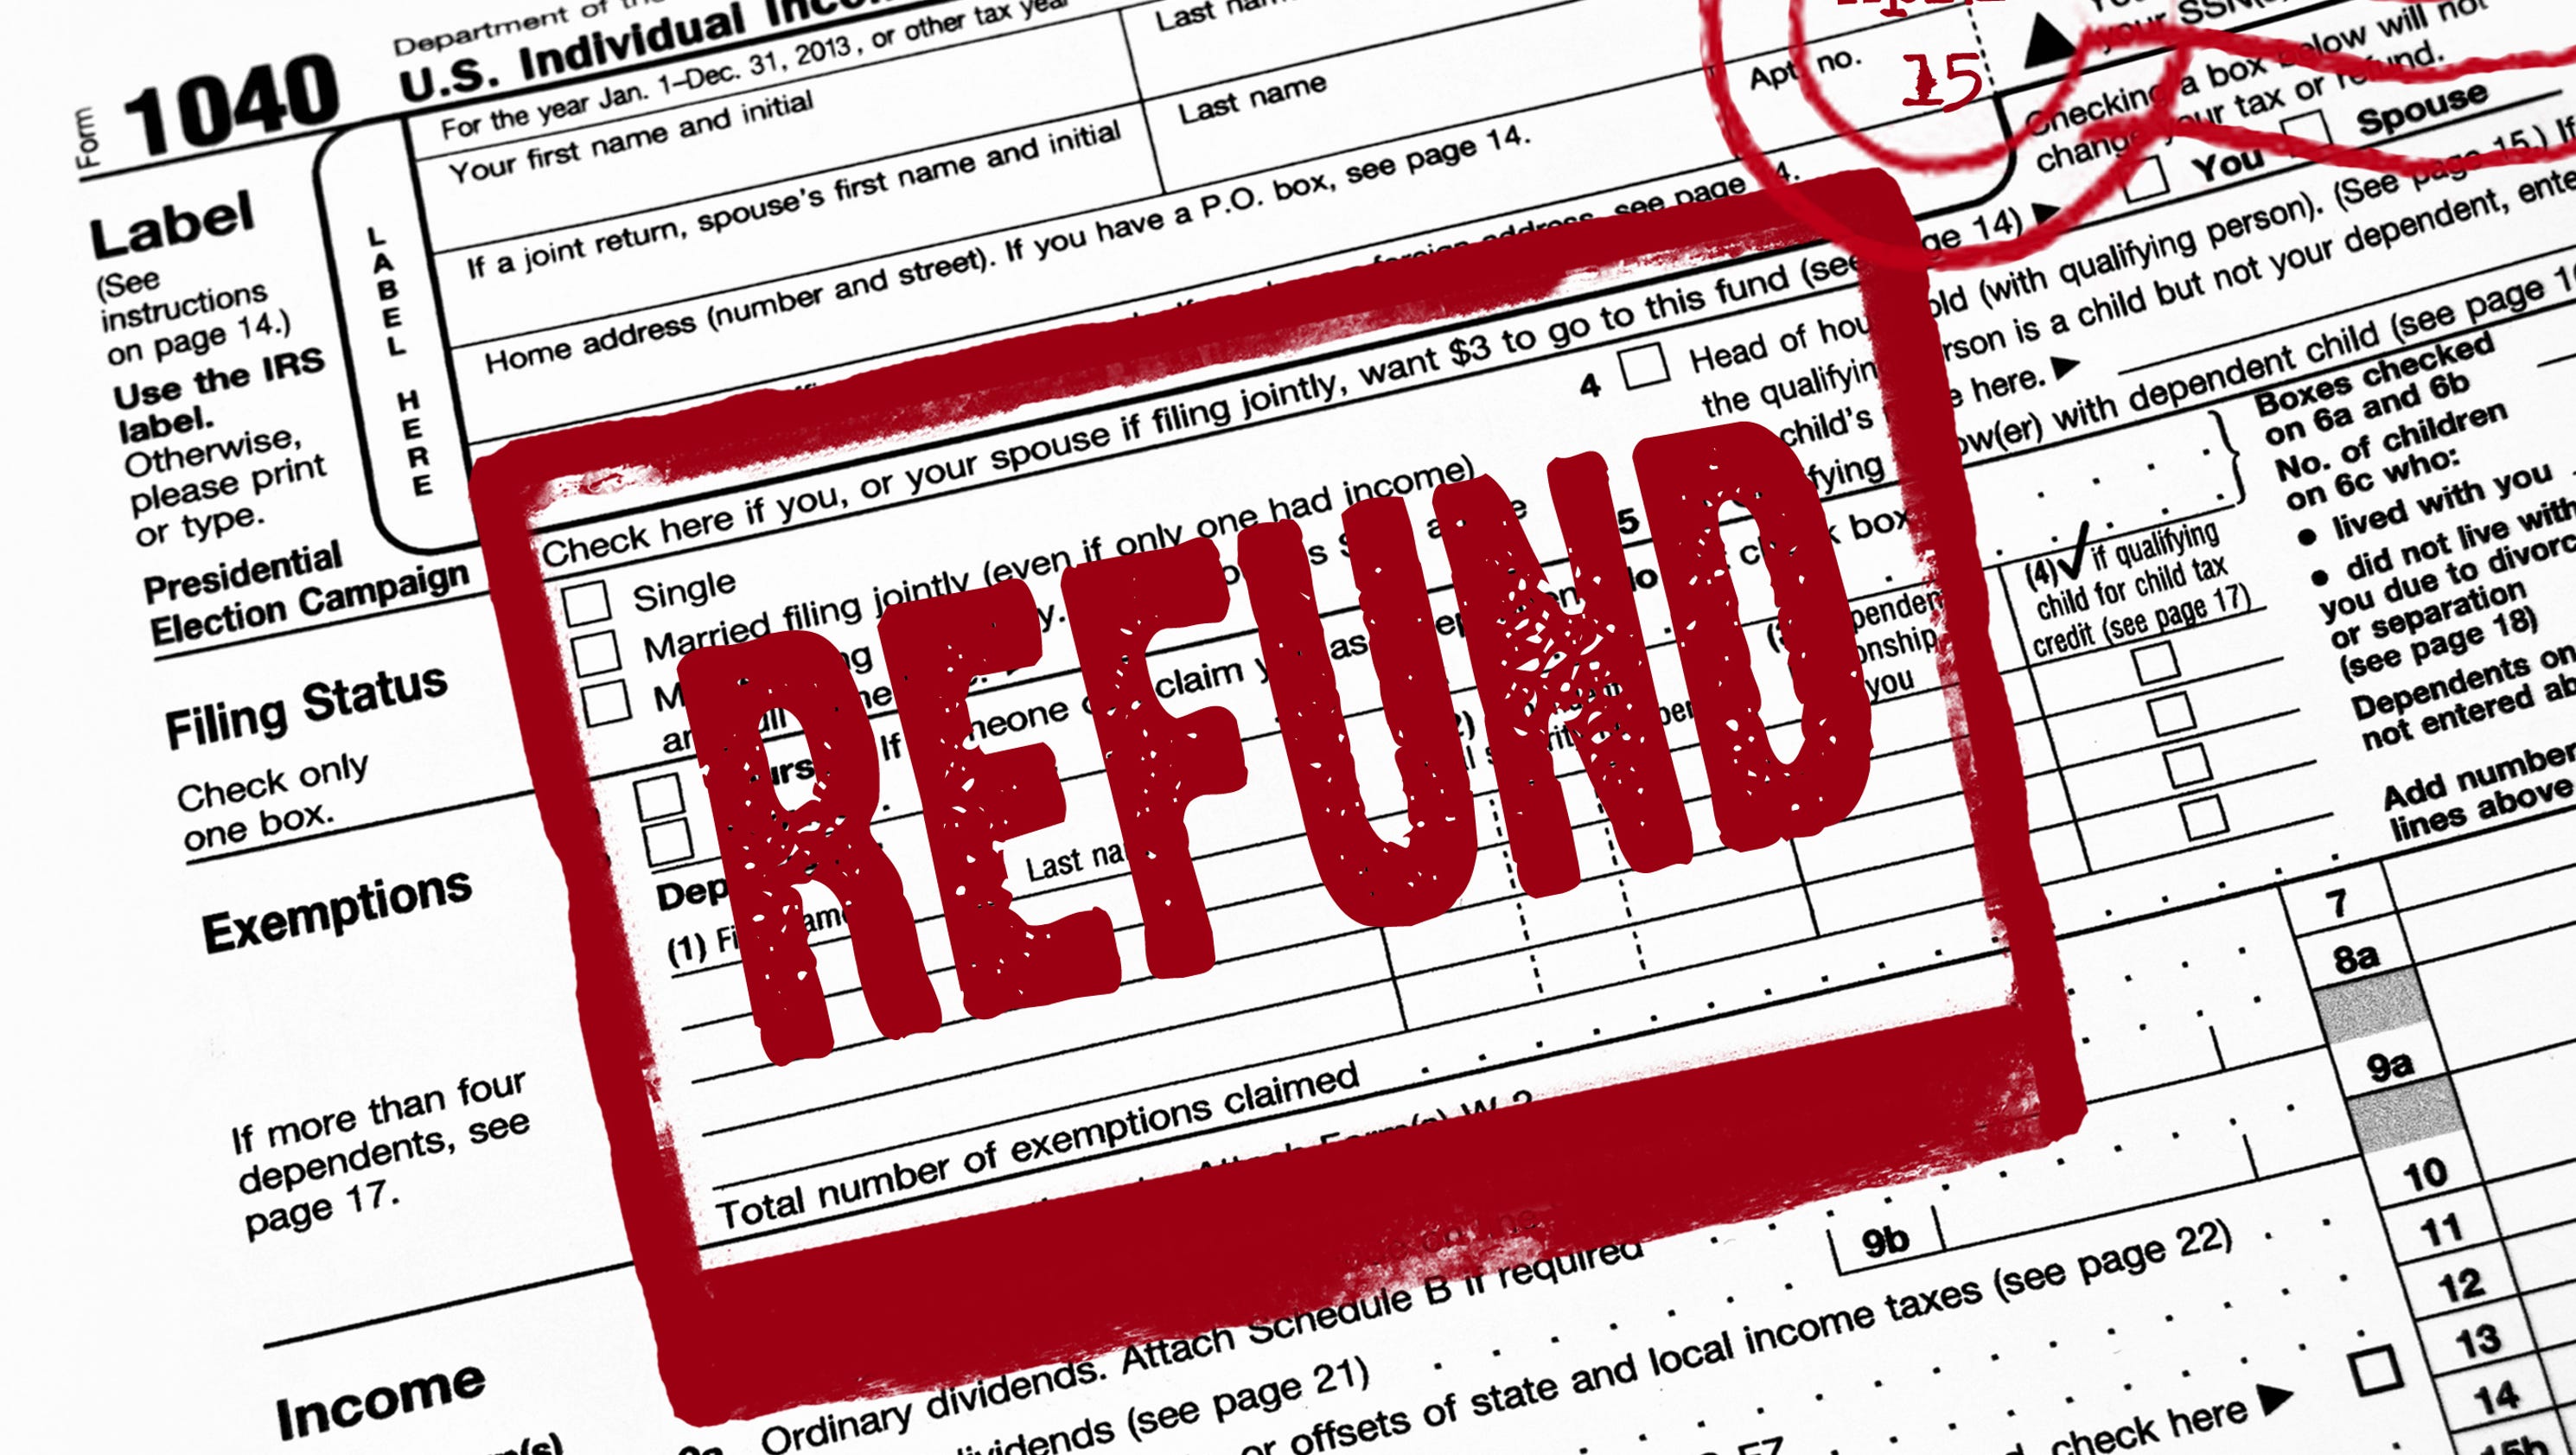 taxes-what-to-do-if-you-really-need-your-tax-refund-fast